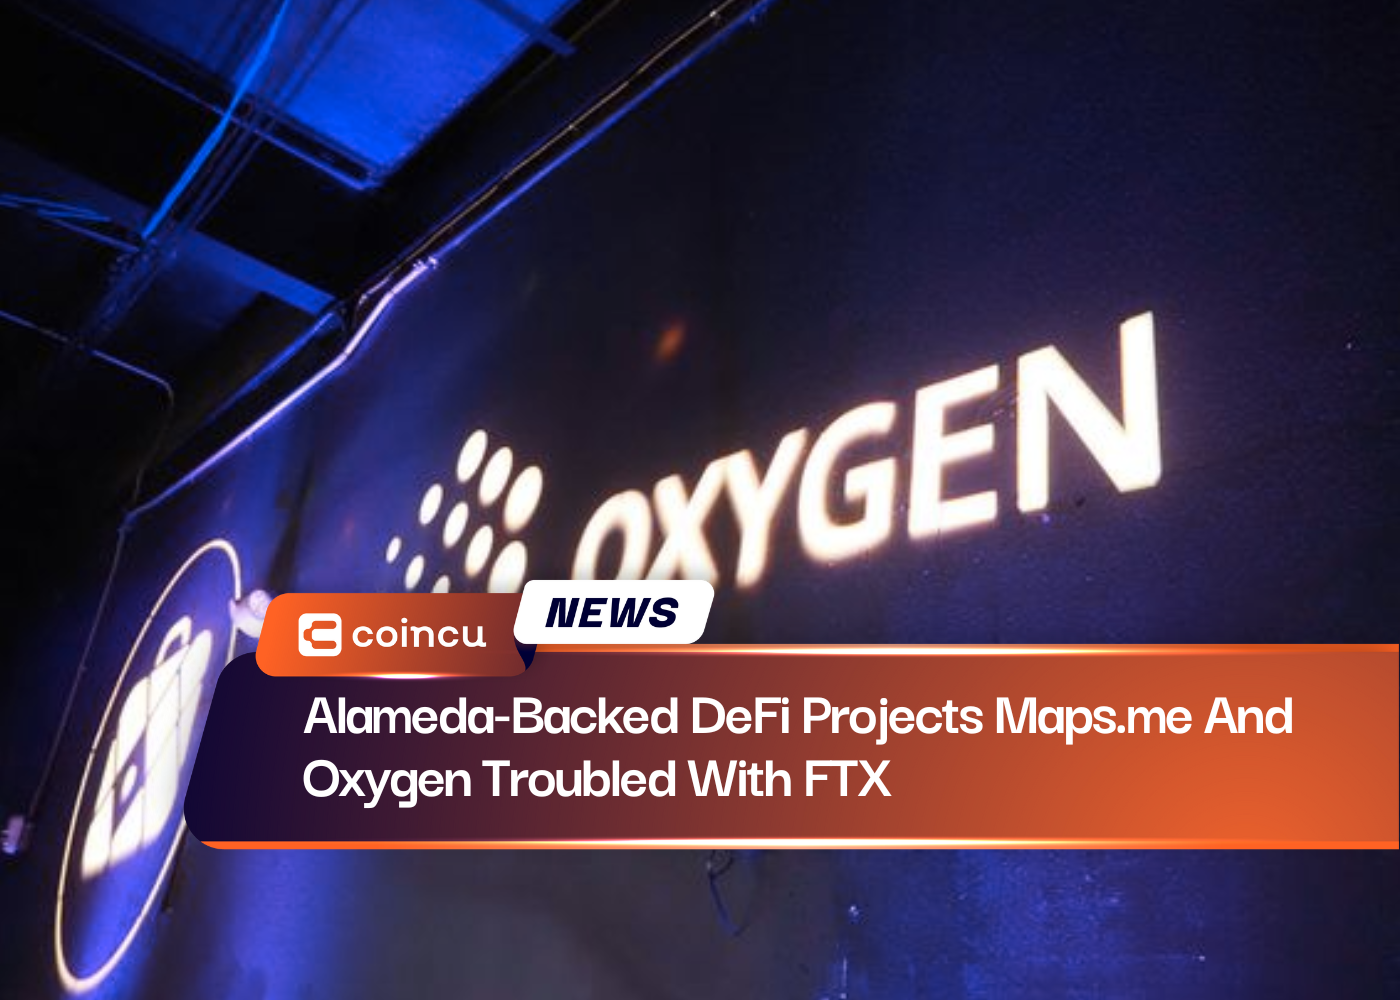 Alameda-Backed DeFi Projects Maps.me And Oxygen Troubled With FTX